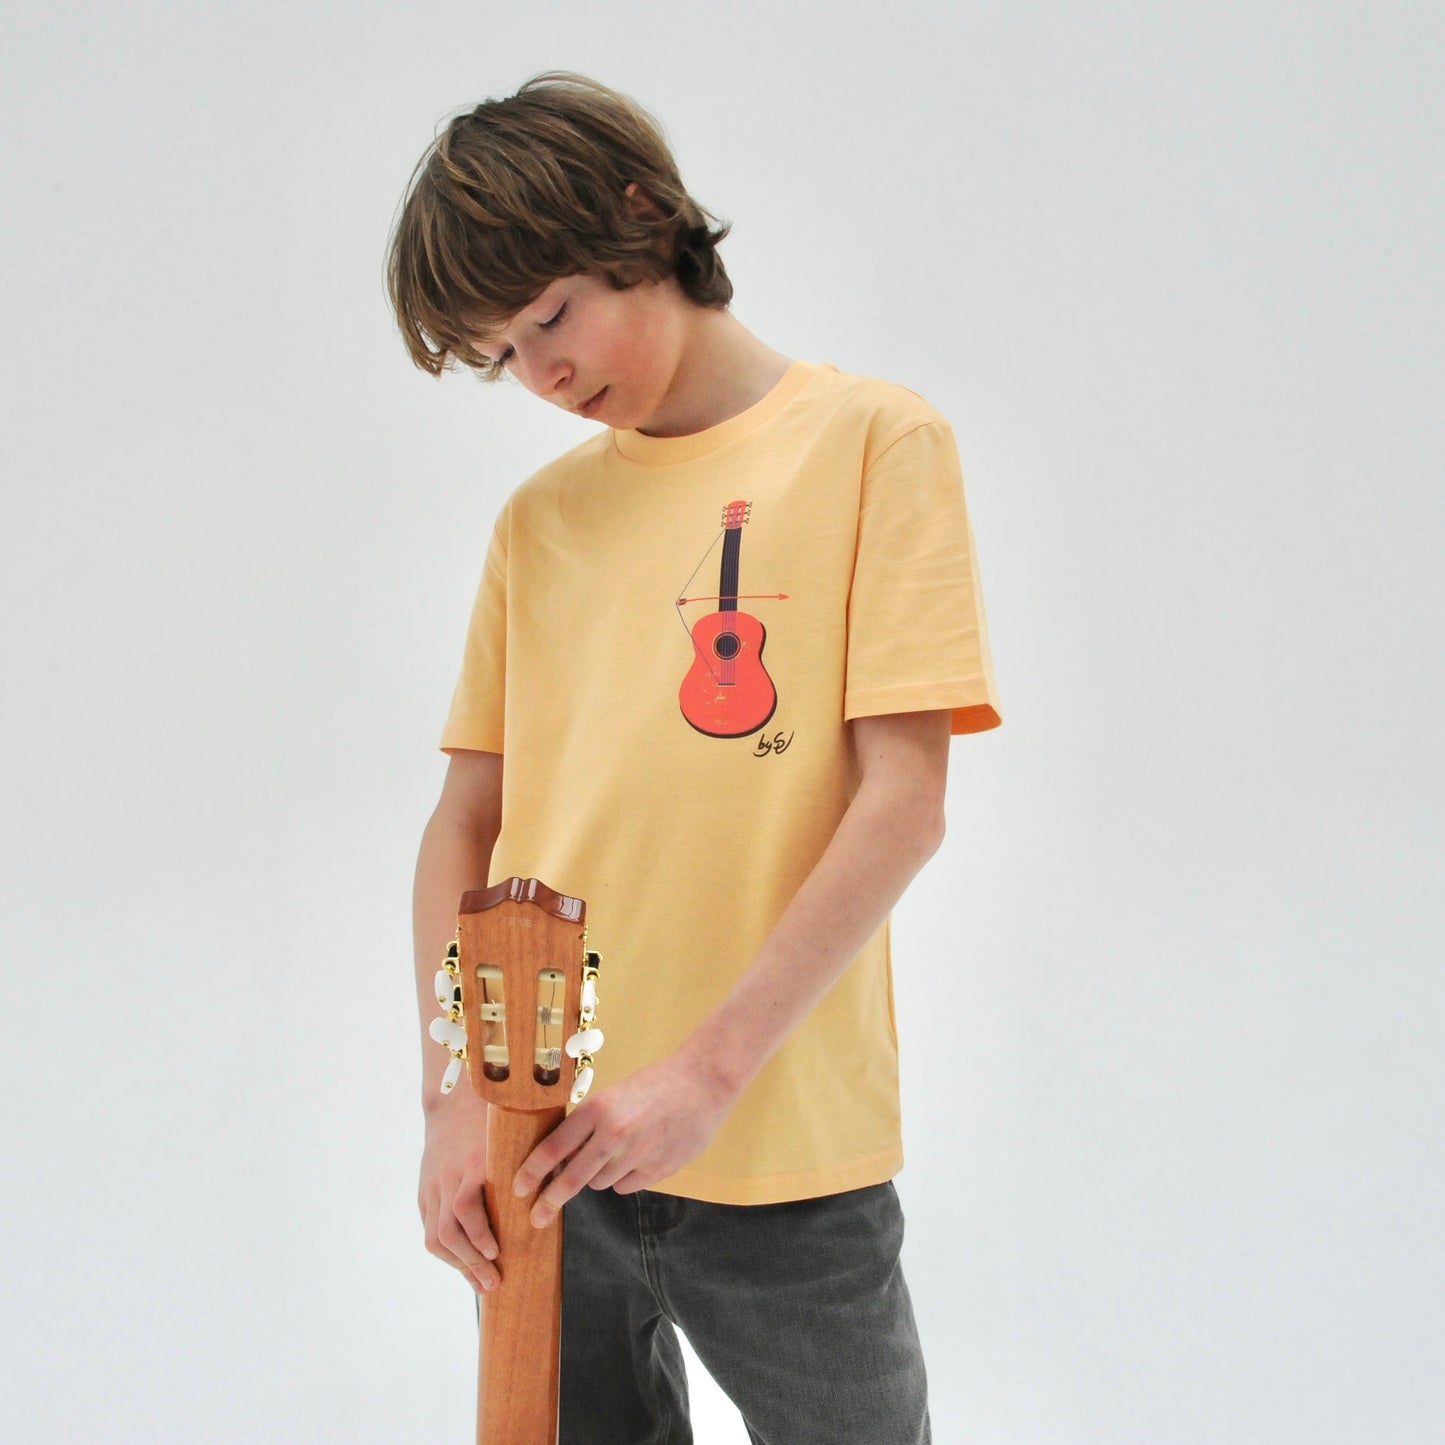 STRUCK BY MUSIC - TEE / YELLOW